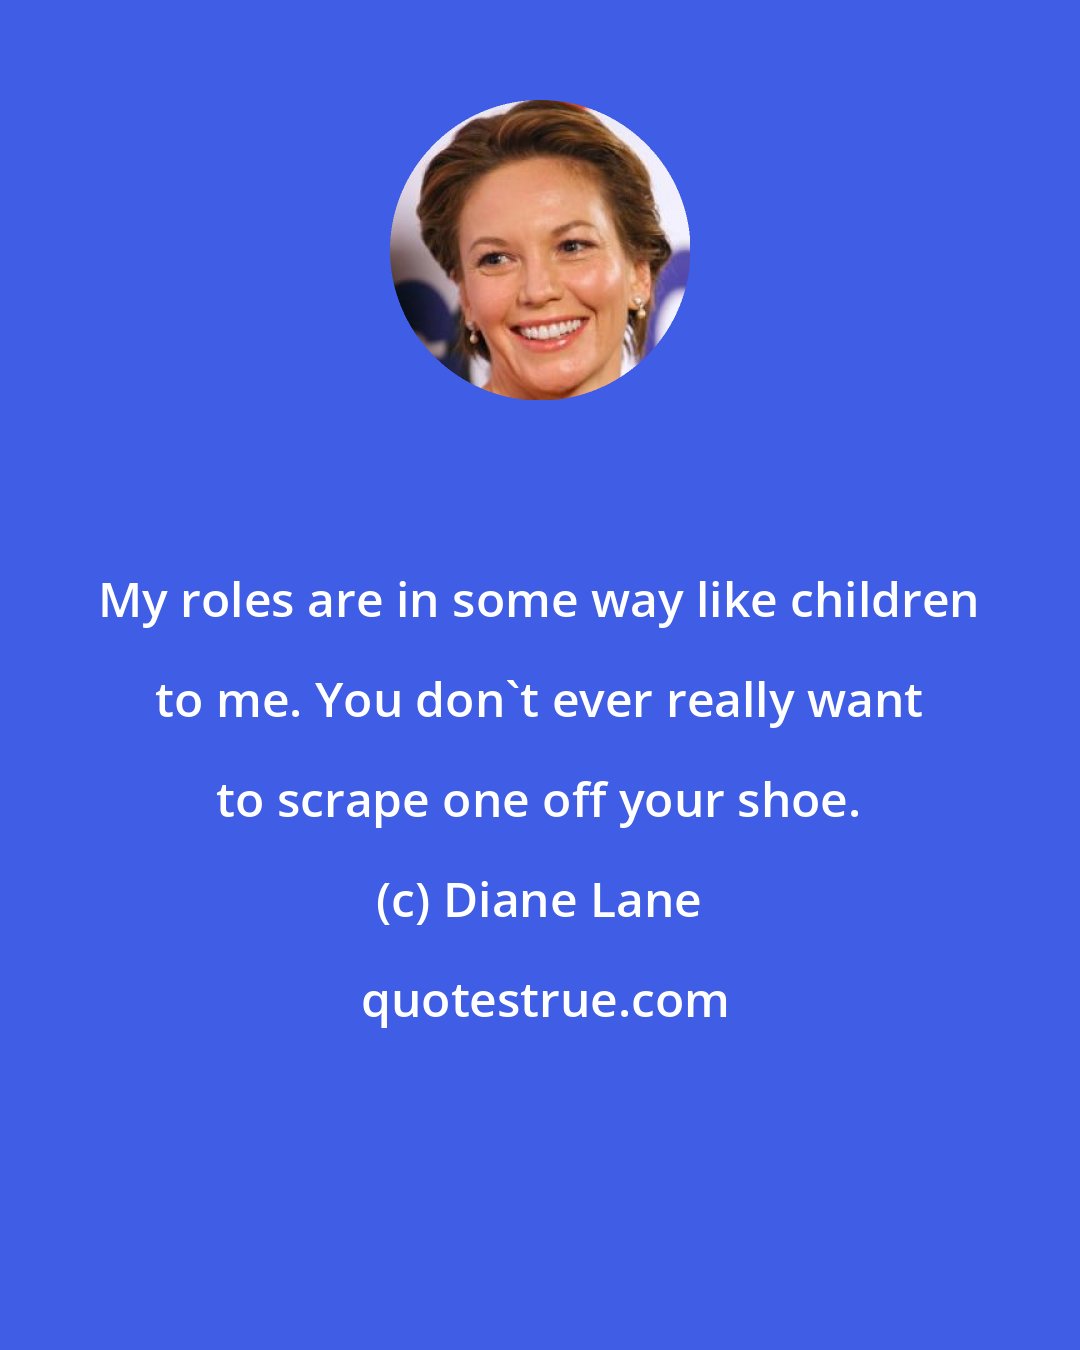 Diane Lane: My roles are in some way like children to me. You don't ever really want to scrape one off your shoe.